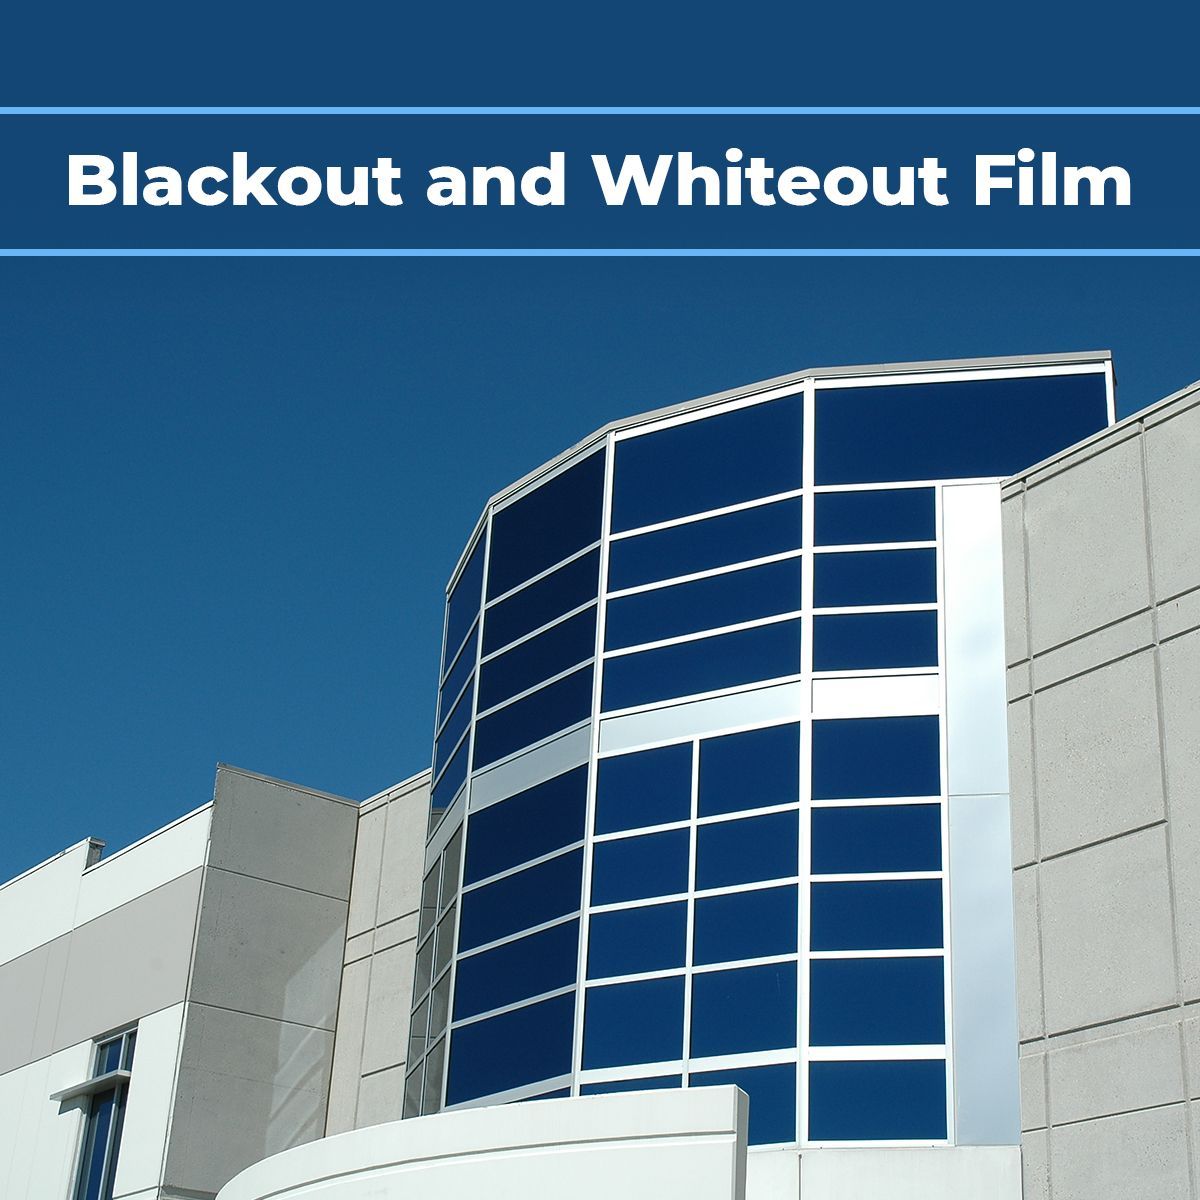 Blackout and Whiteout Film